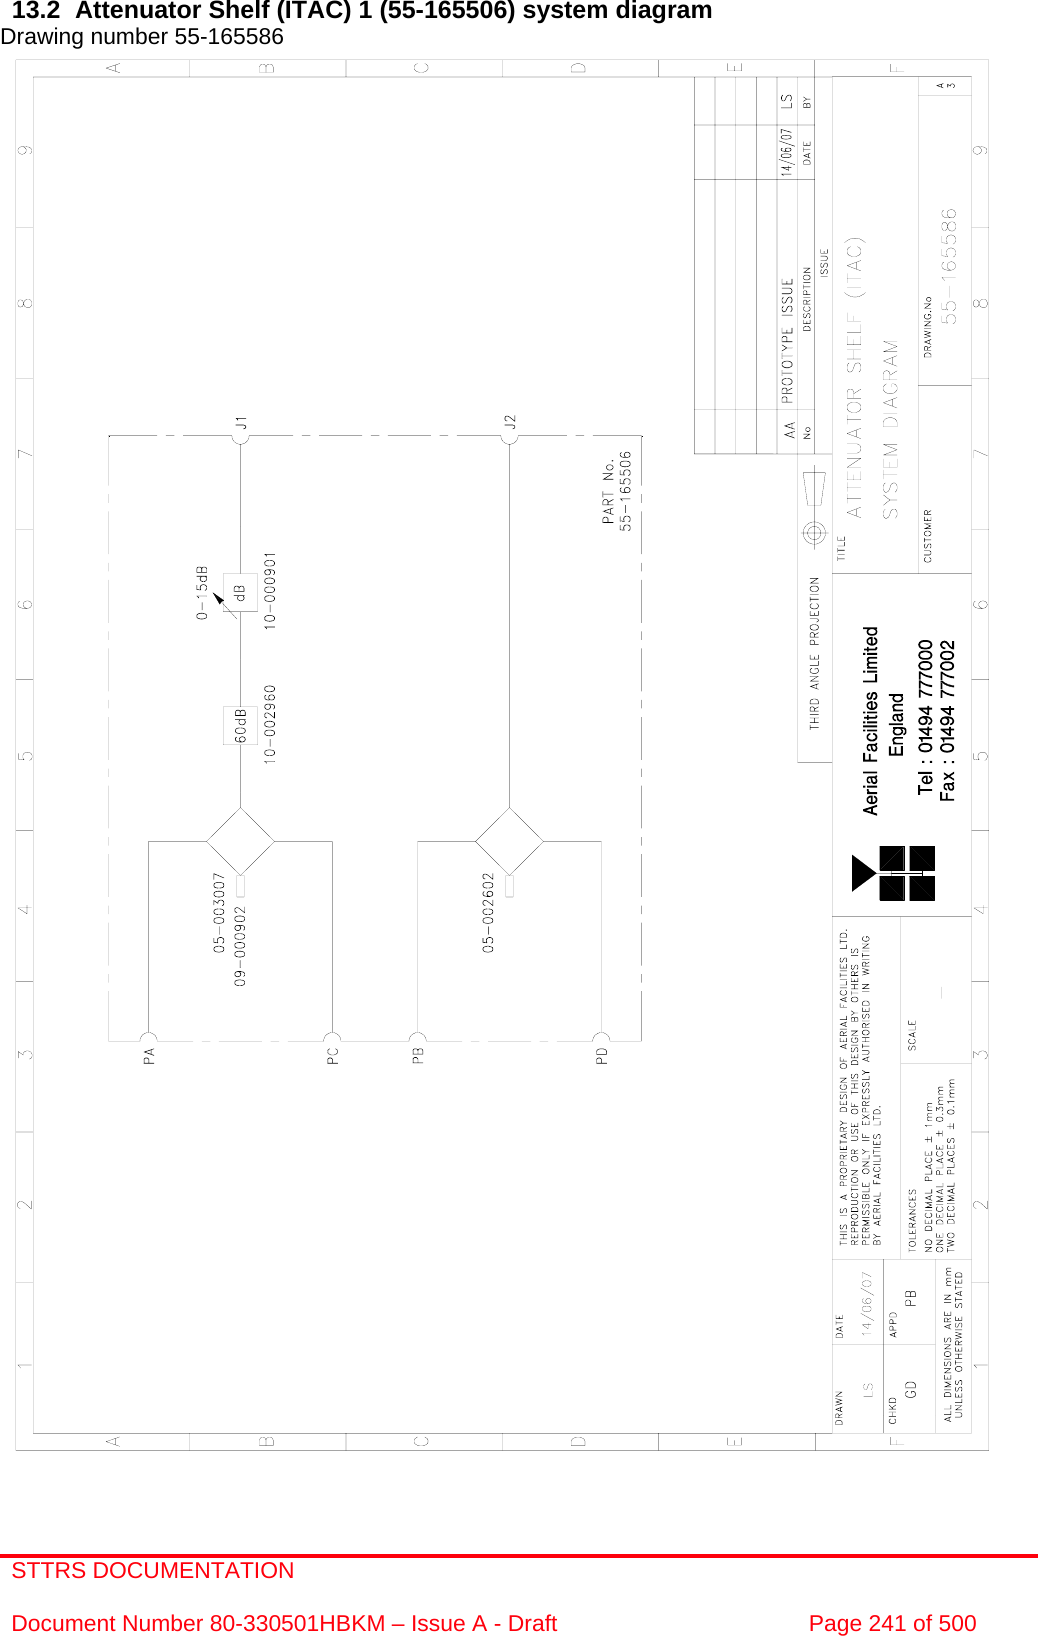 STTRS DOCUMENTATION  Document Number 80-330501HBKM – Issue A - Draft  Page 241 of 500   13.2  Attenuator Shelf (ITAC) 1 (55-165506) system diagram  Drawing number 55-165586                                                       